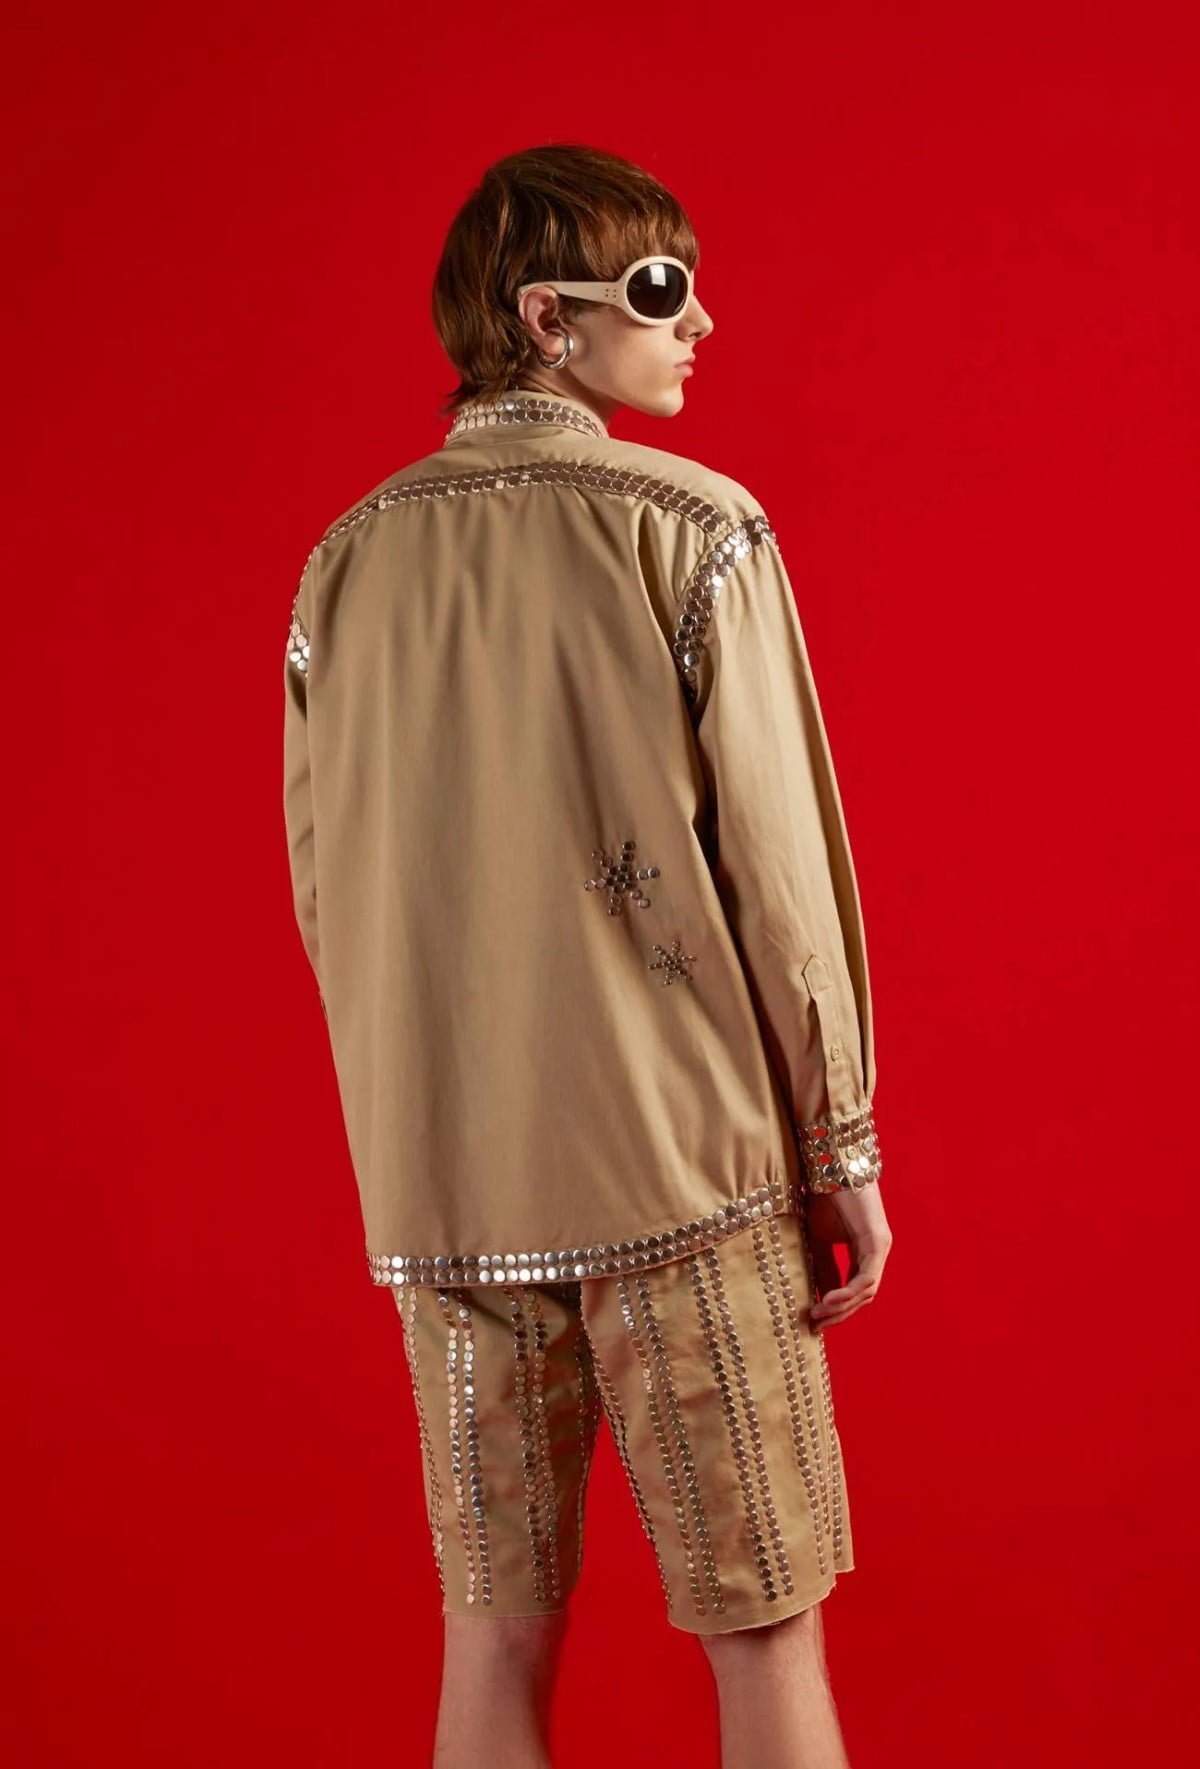 GUCCI Vault x Dickies Workwear Collection